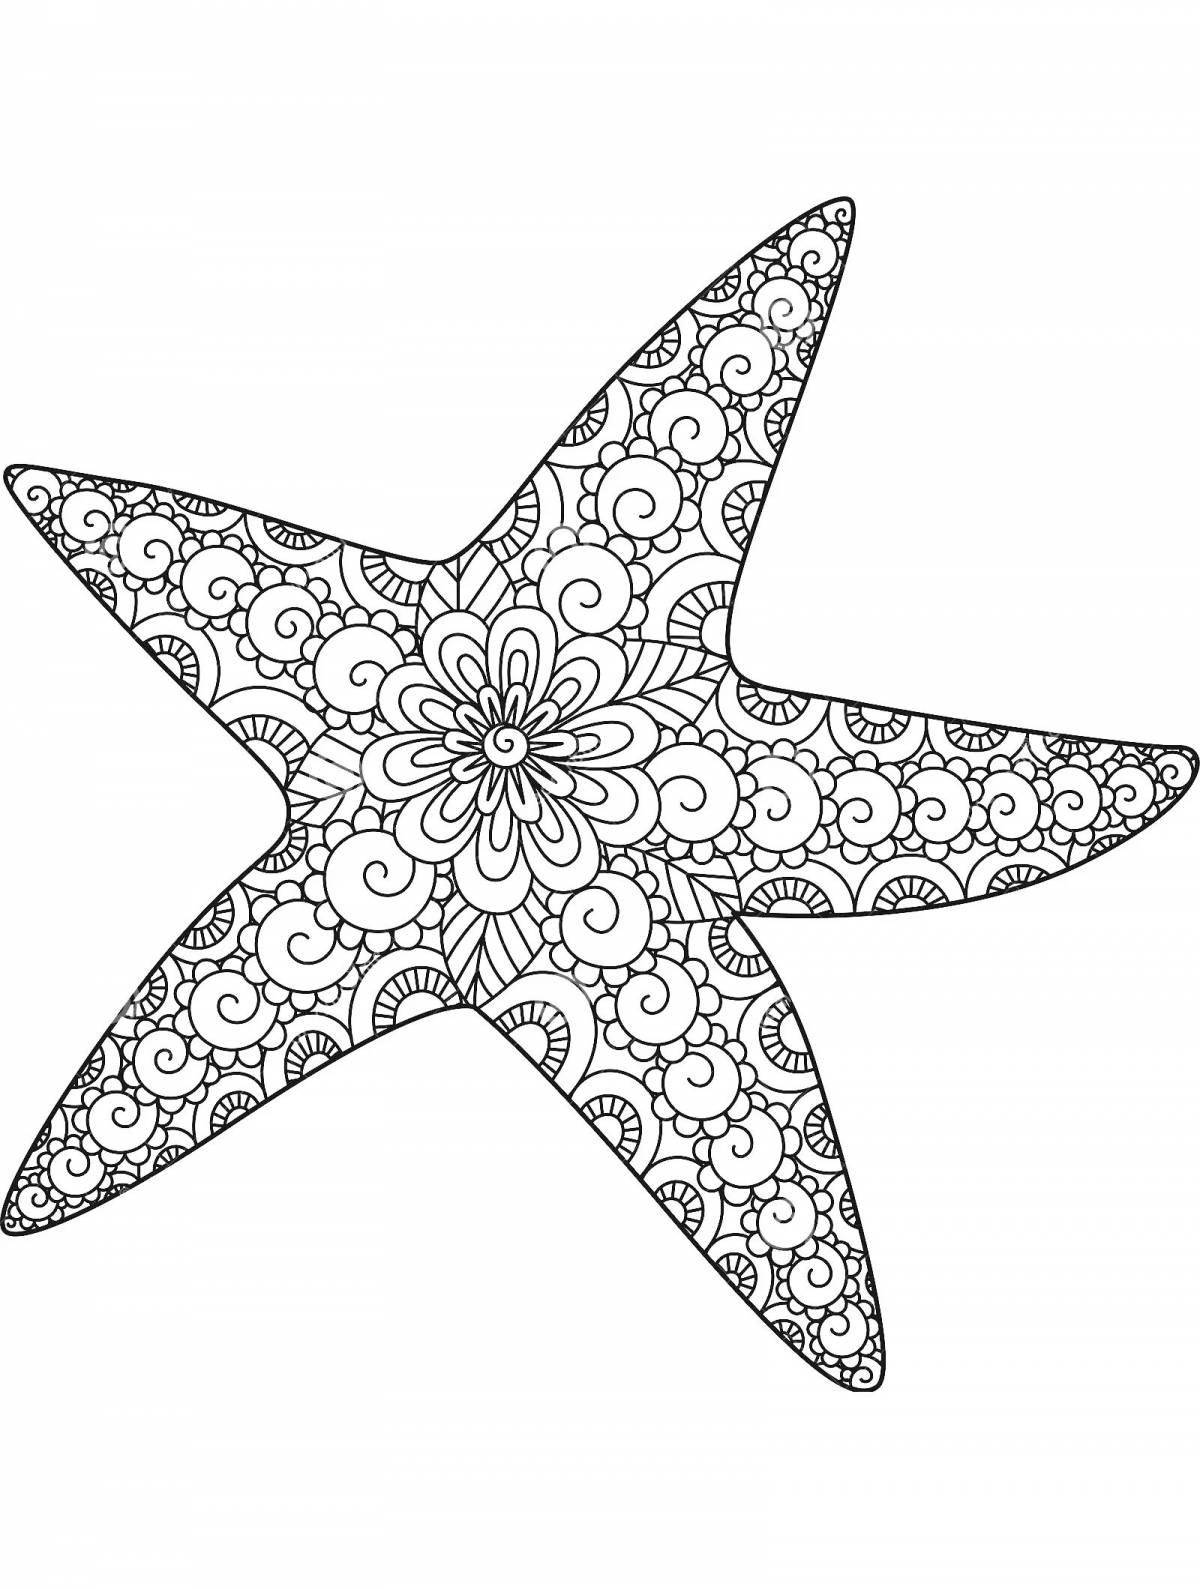 Exciting starfish coloring book for kids